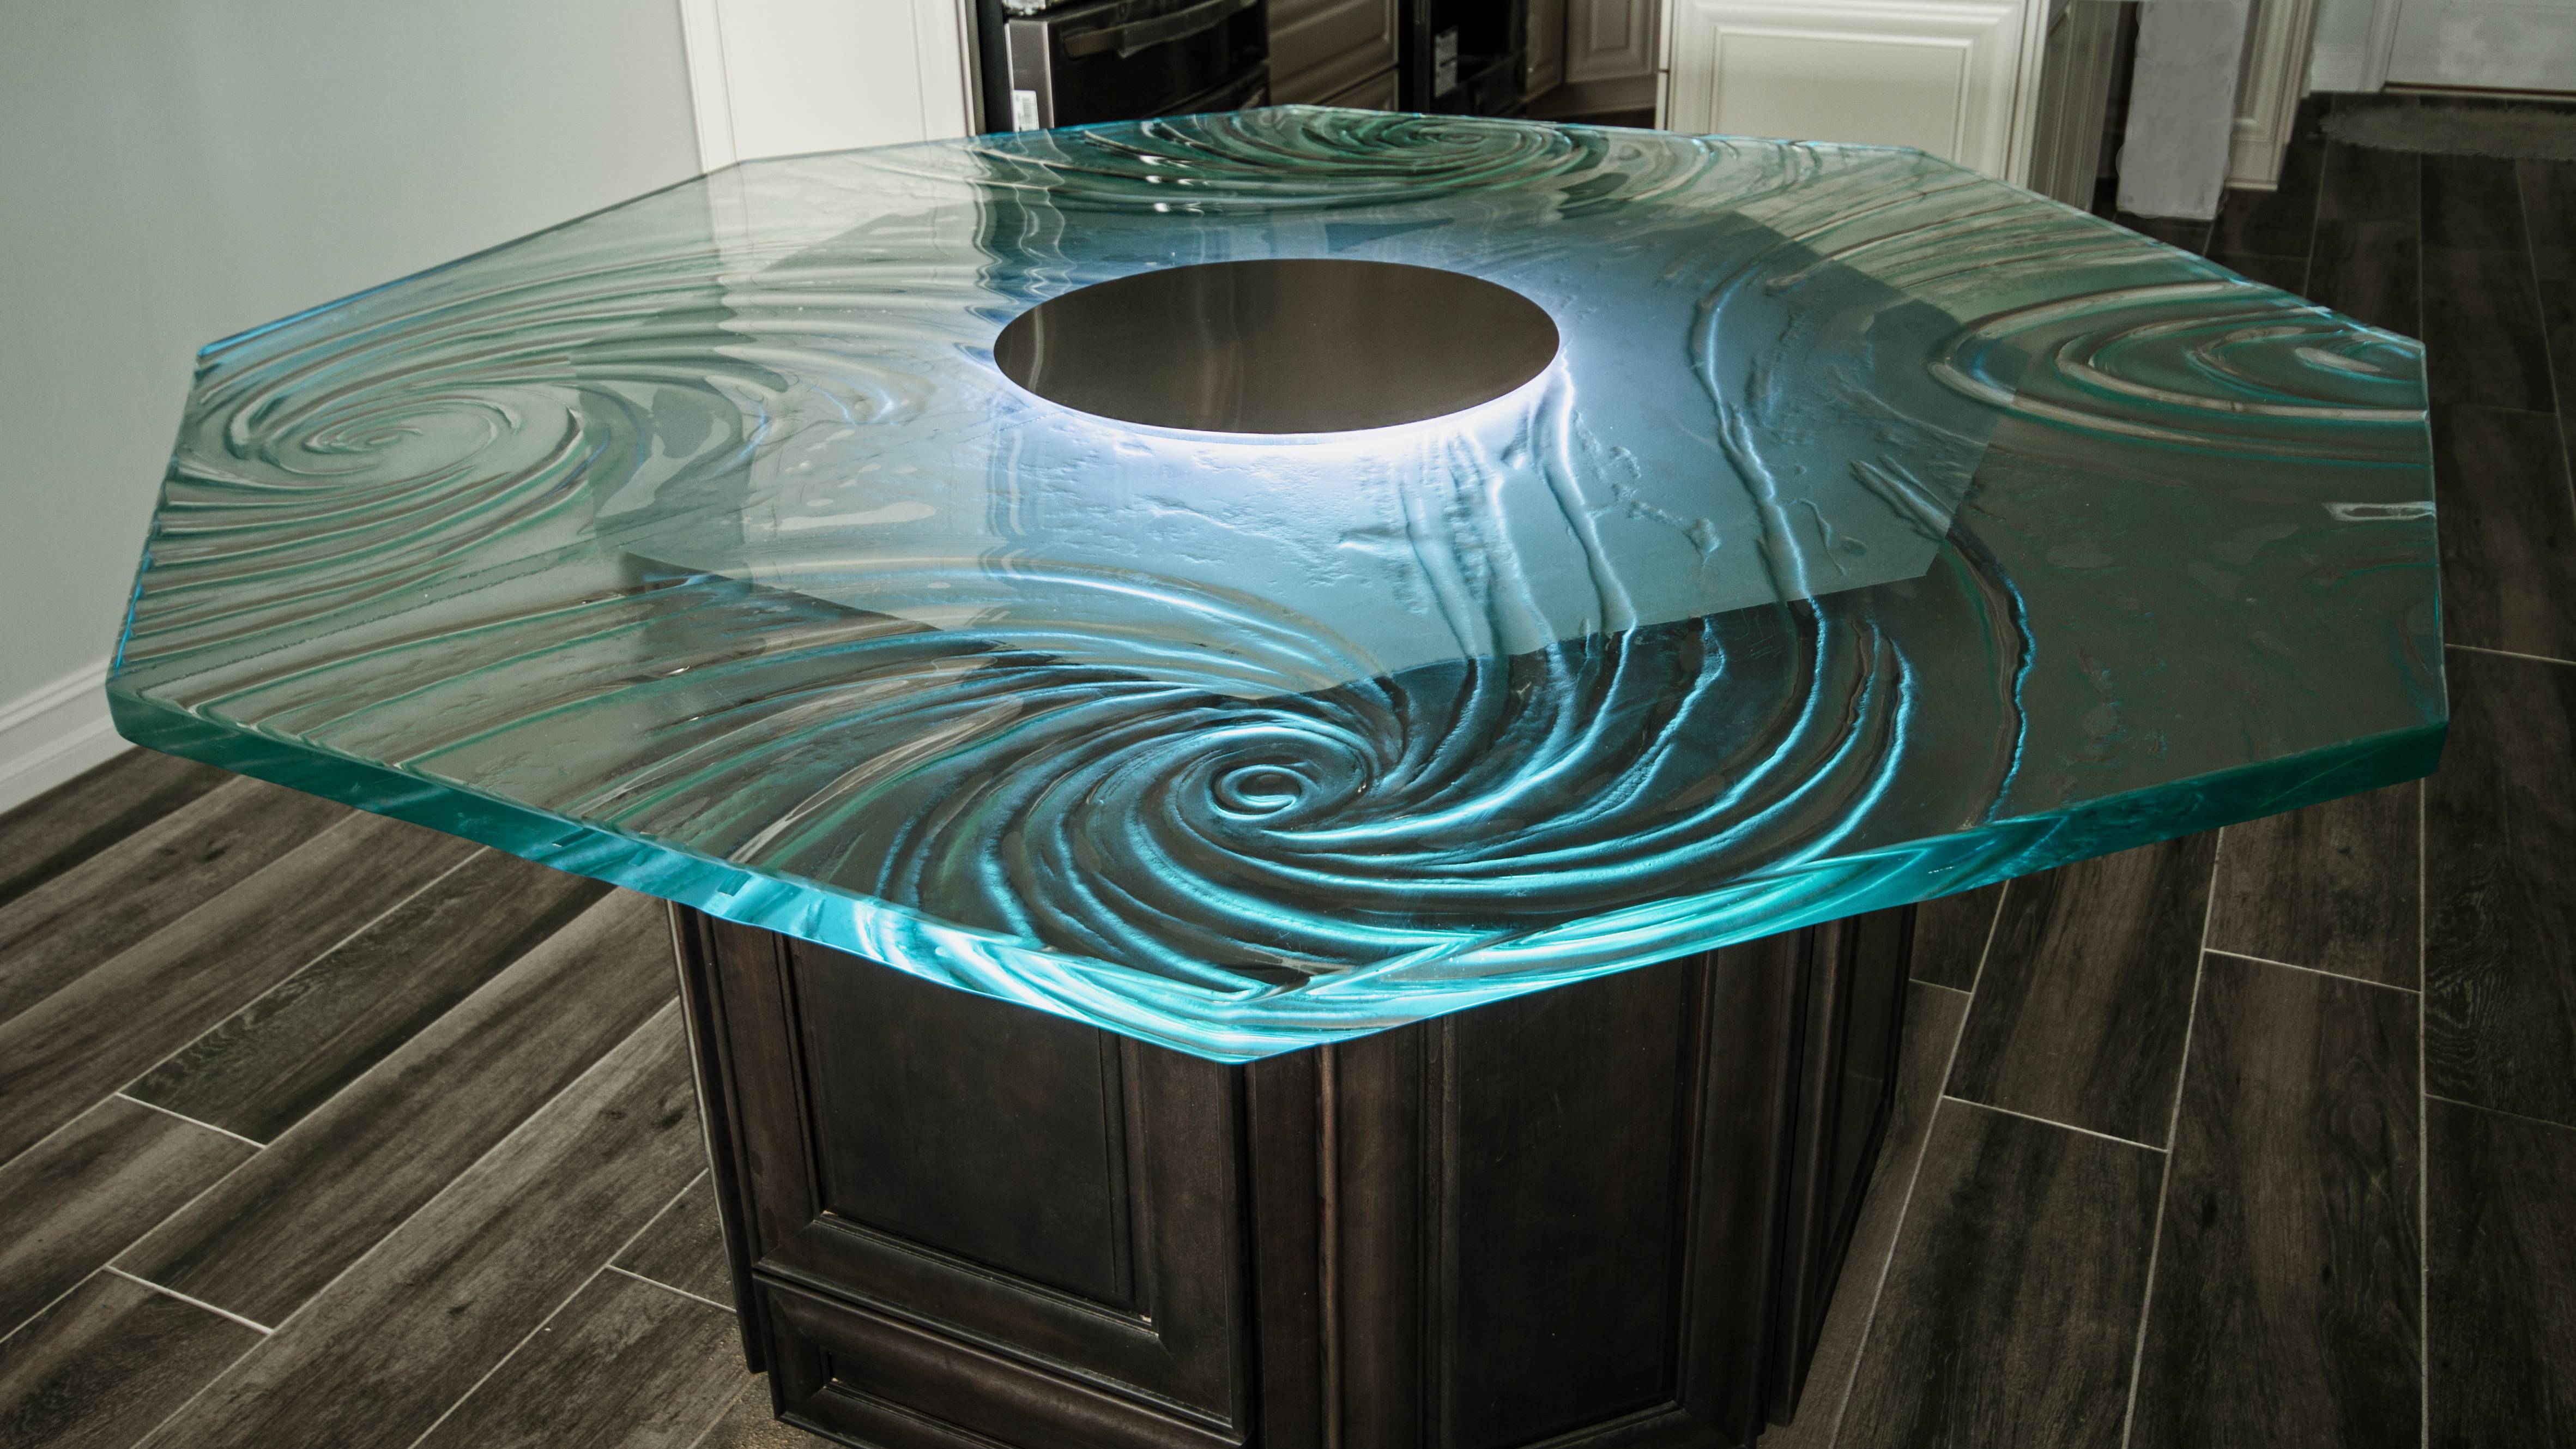 Glass Countertop Lighting Which Method Is Best Downing Designs